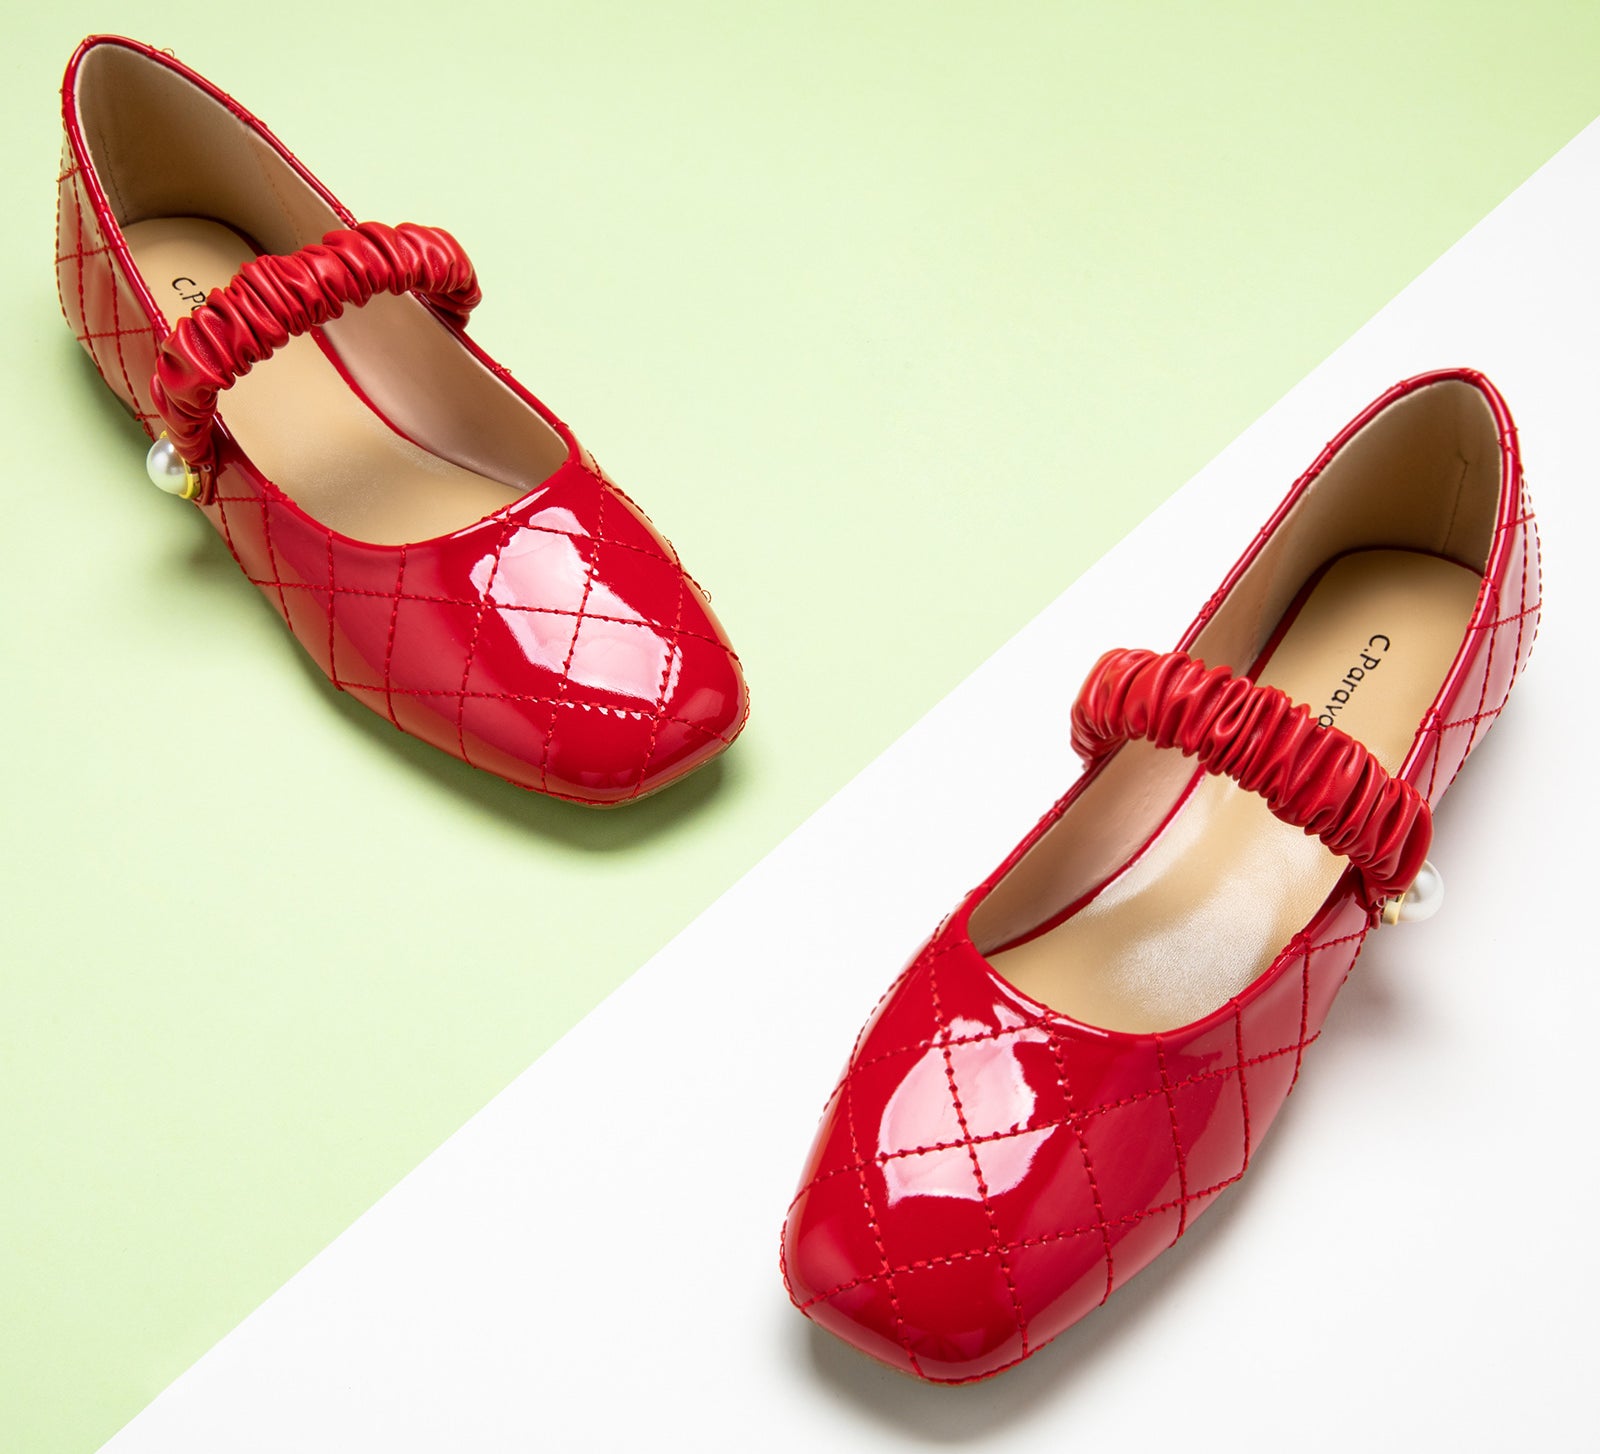 Red Mary Jane with Crossed Stripes, adding a touch of modernity to your ensemble in a striking hue